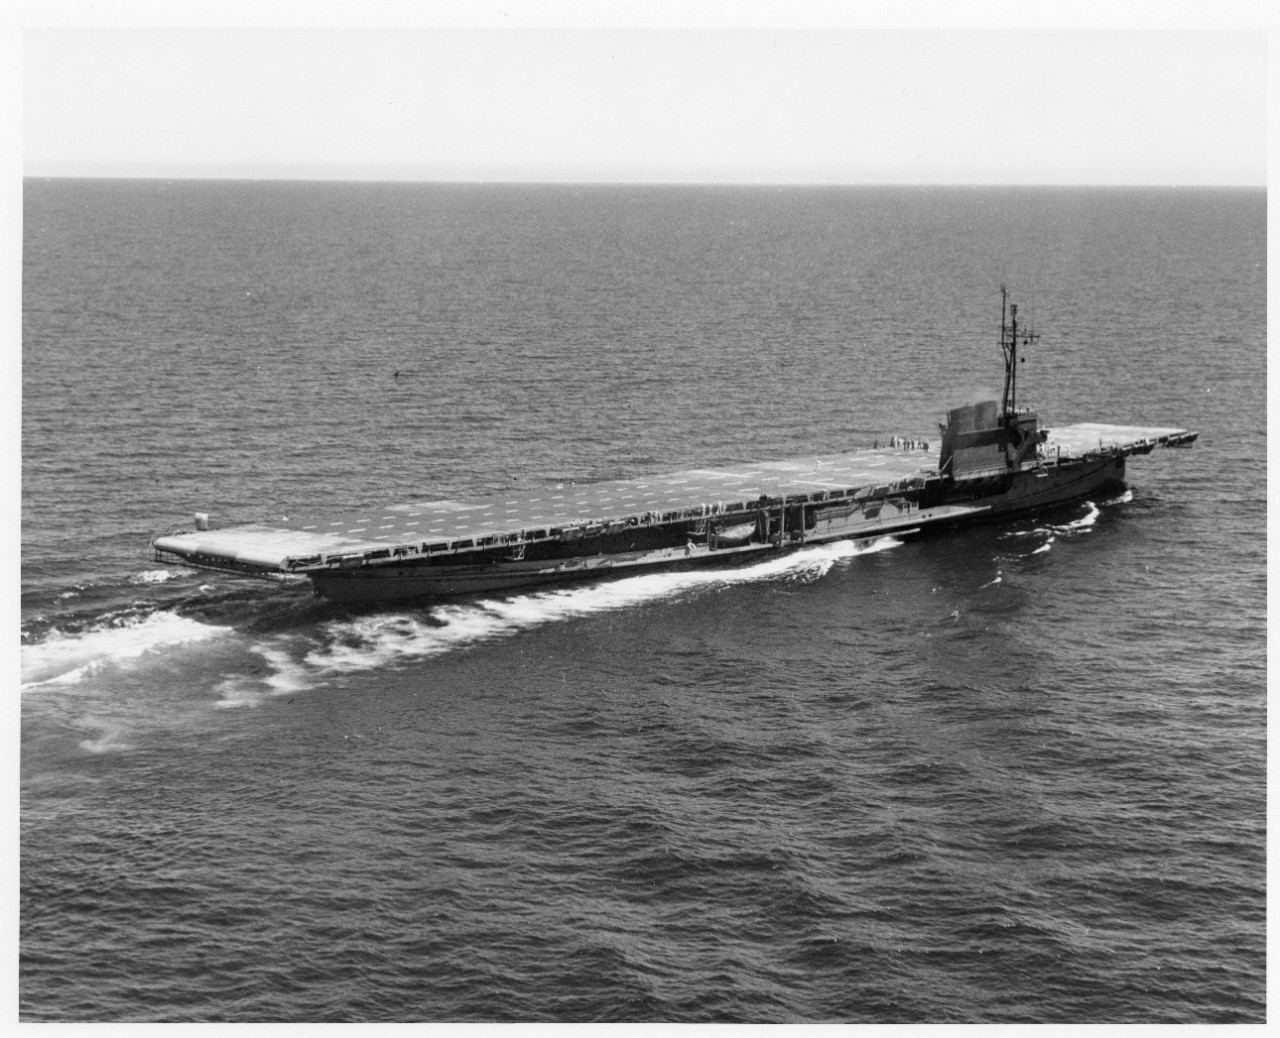 Aerial image of the USS sable from 1945.